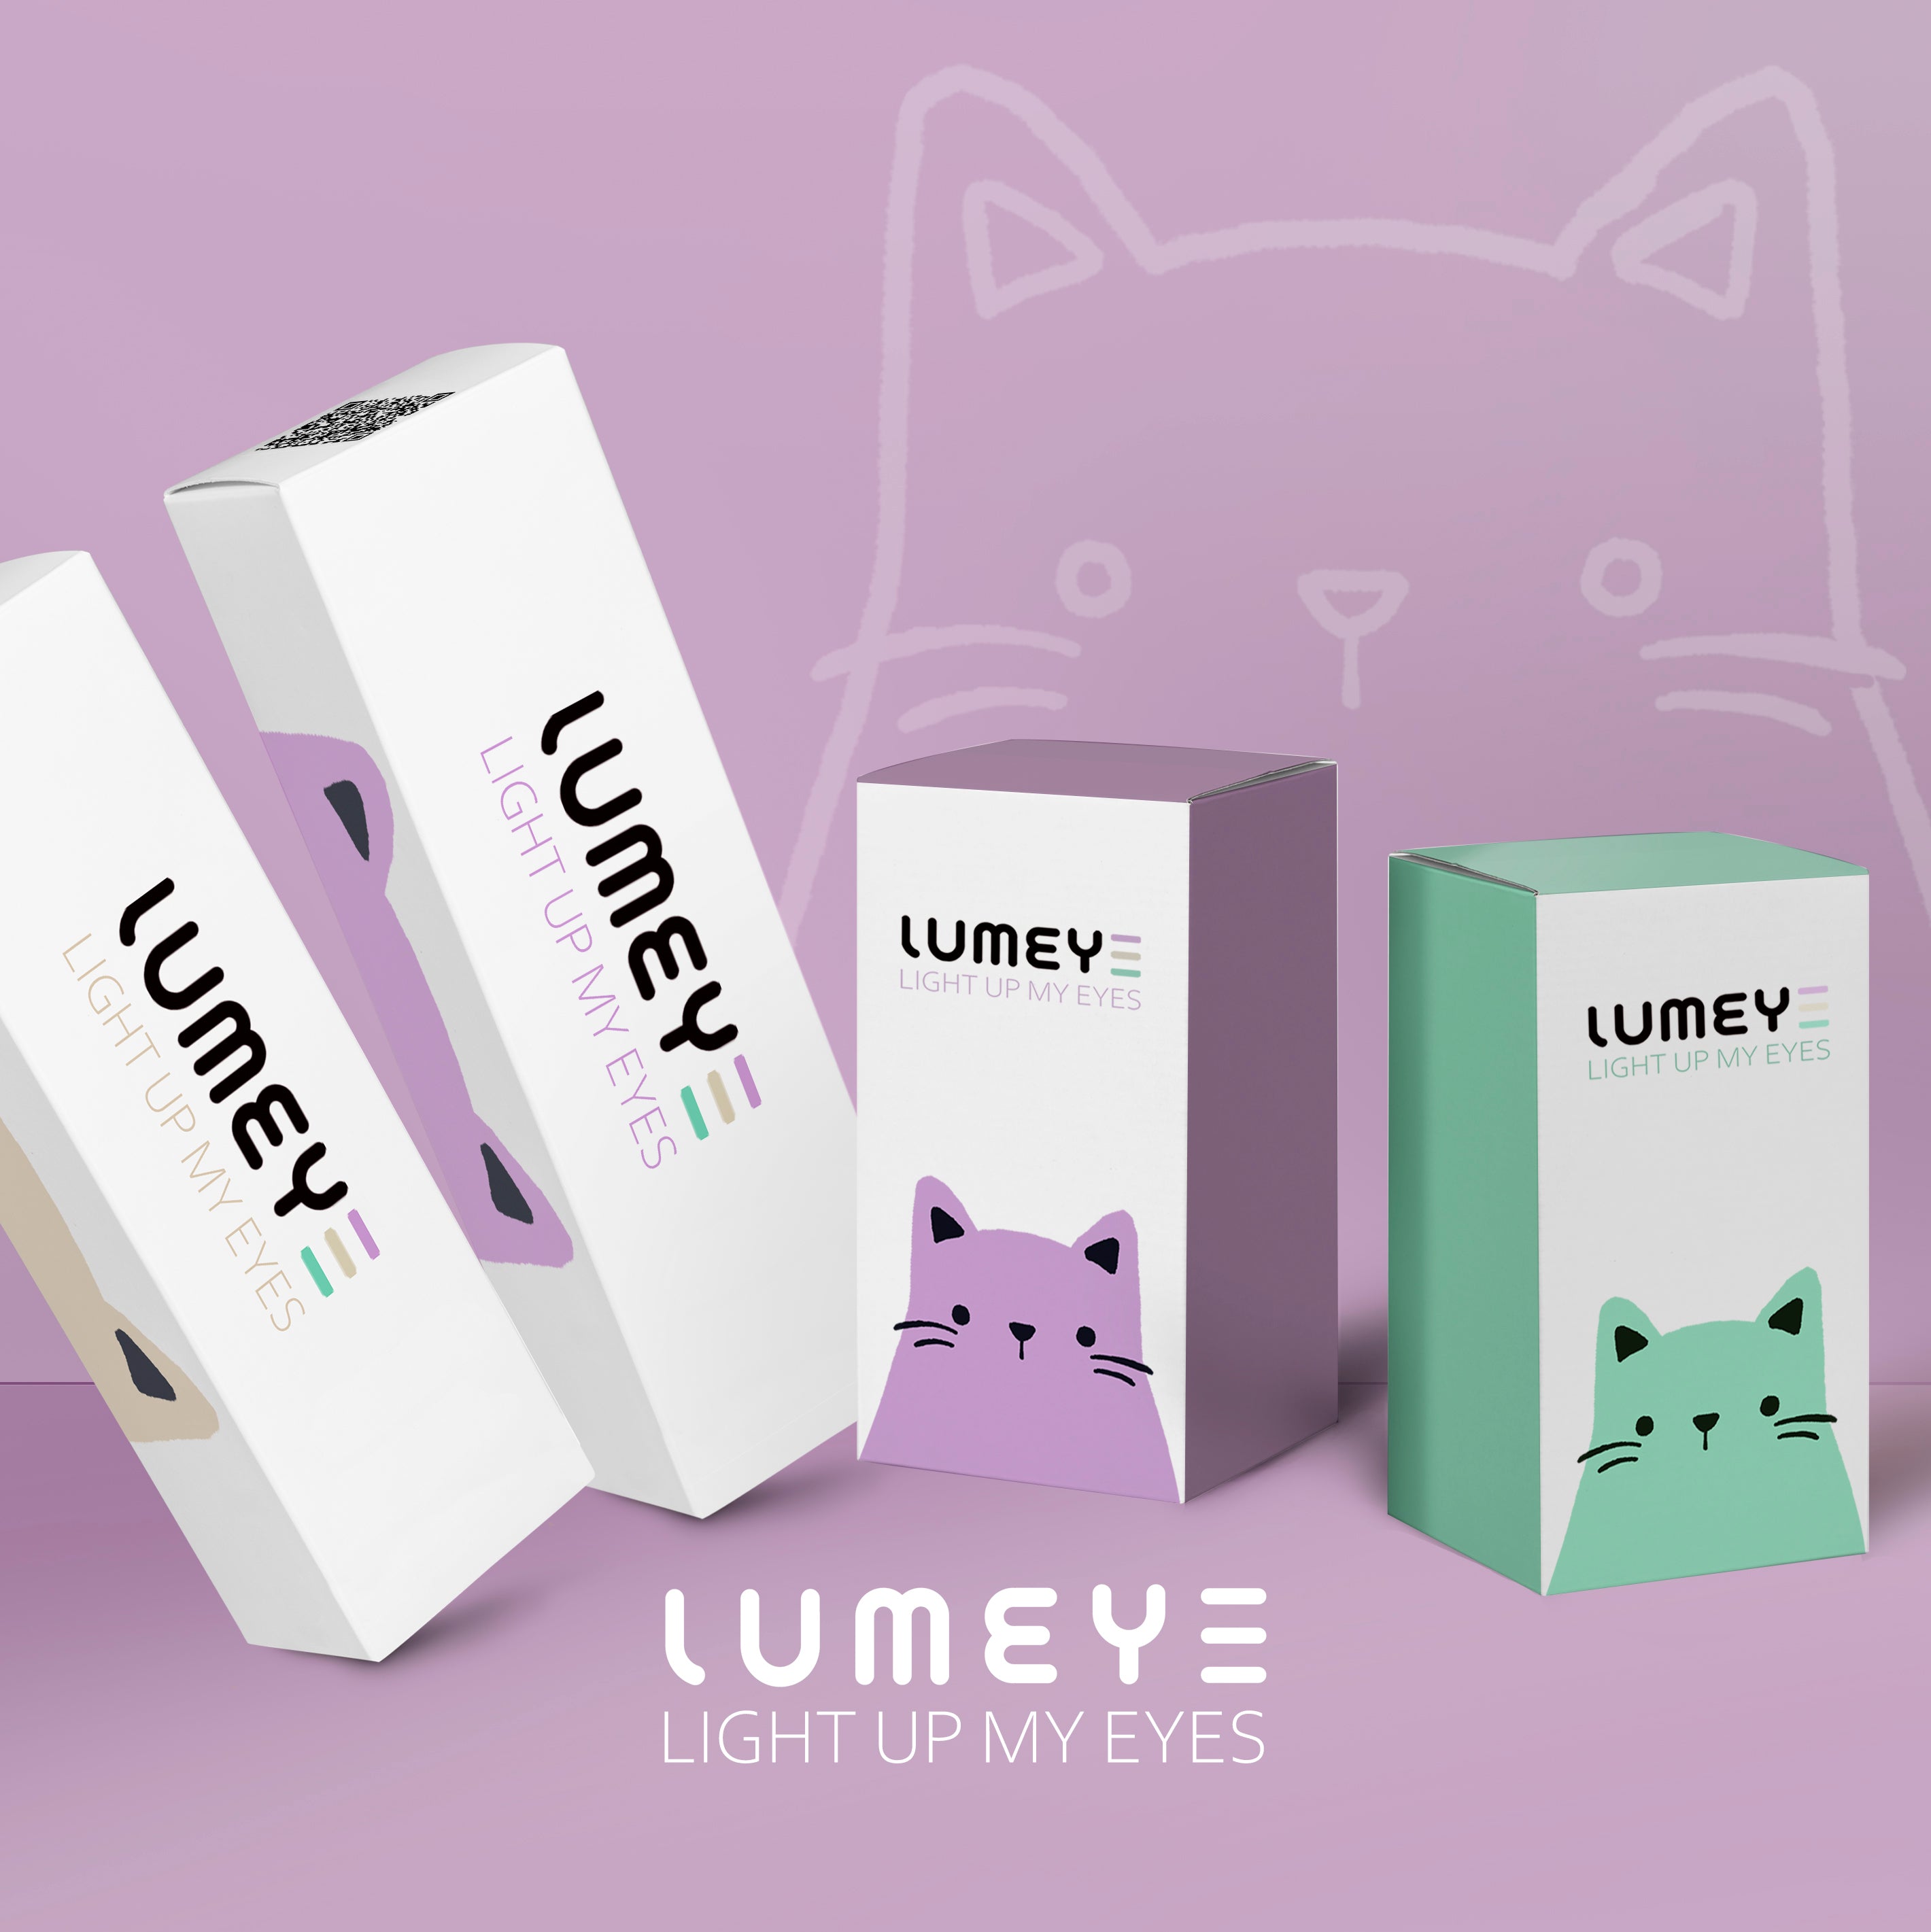 Best COLORED CONTACTS - LUMEYE Chubby Brown Colored Contact Lenses - LUMEYE